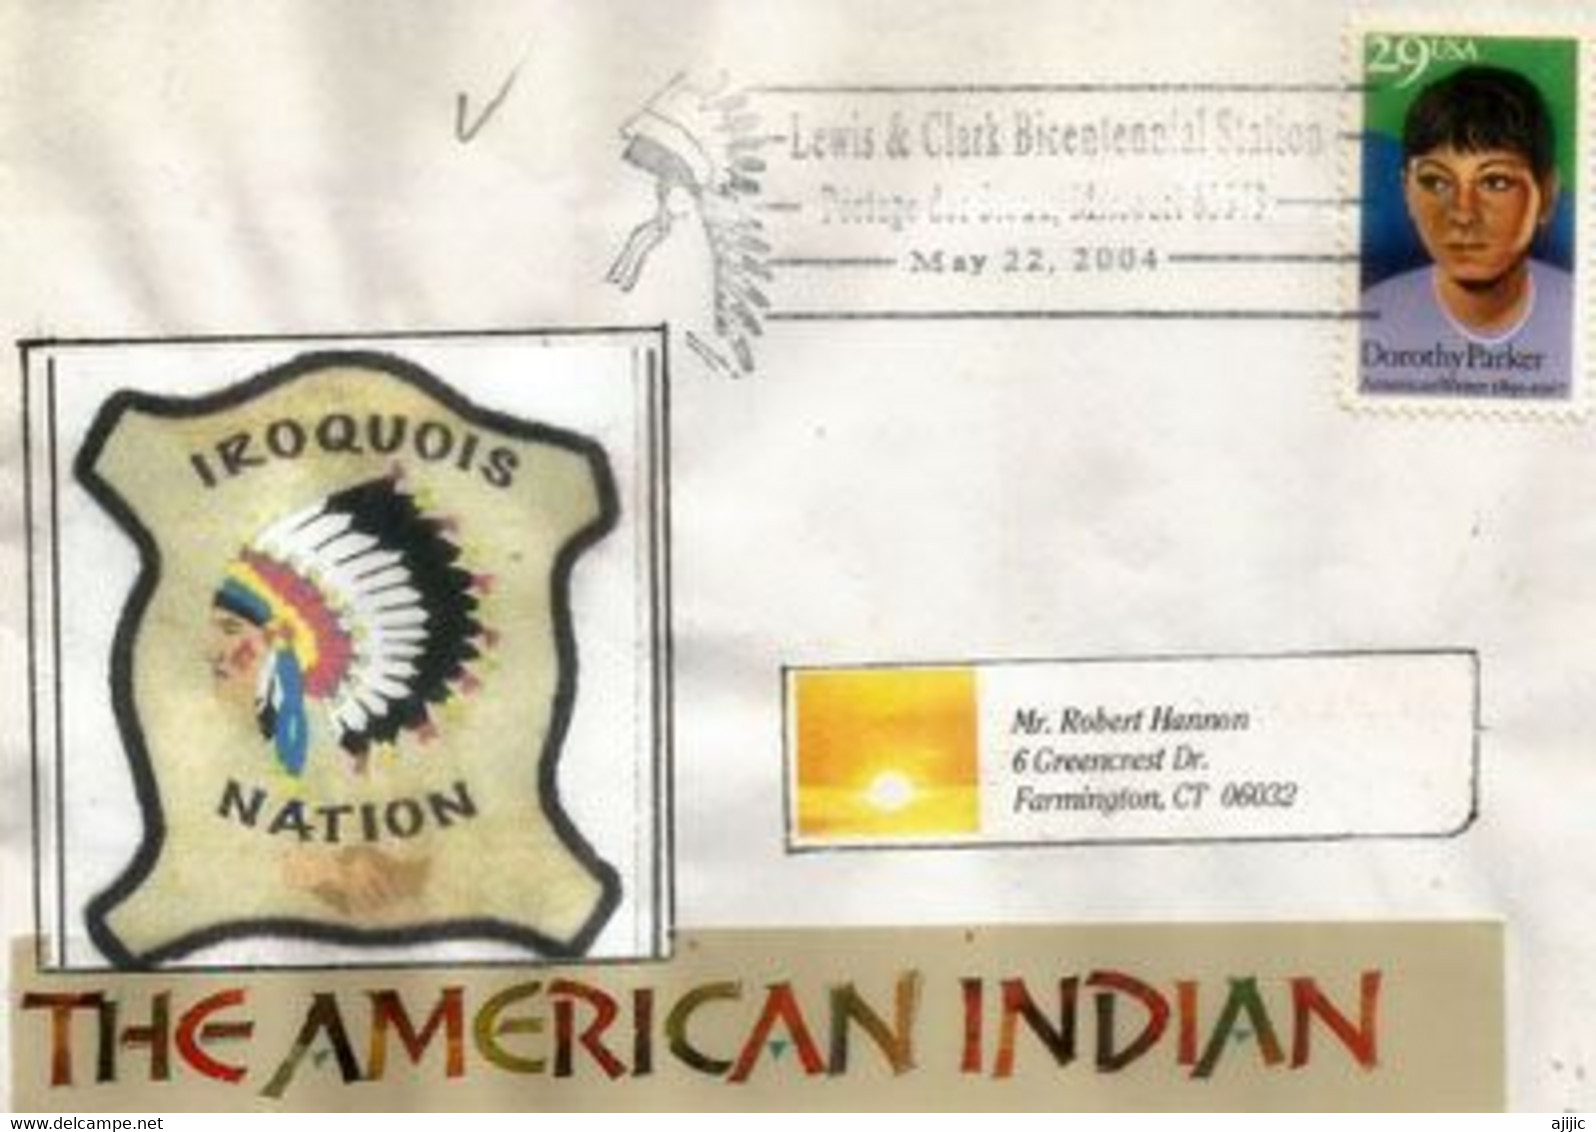 USA.The American Indian (Iroquois Nation) Missouri (Lewis & Clark Expedition Bicentennial)   Letter 2004 - American Indians